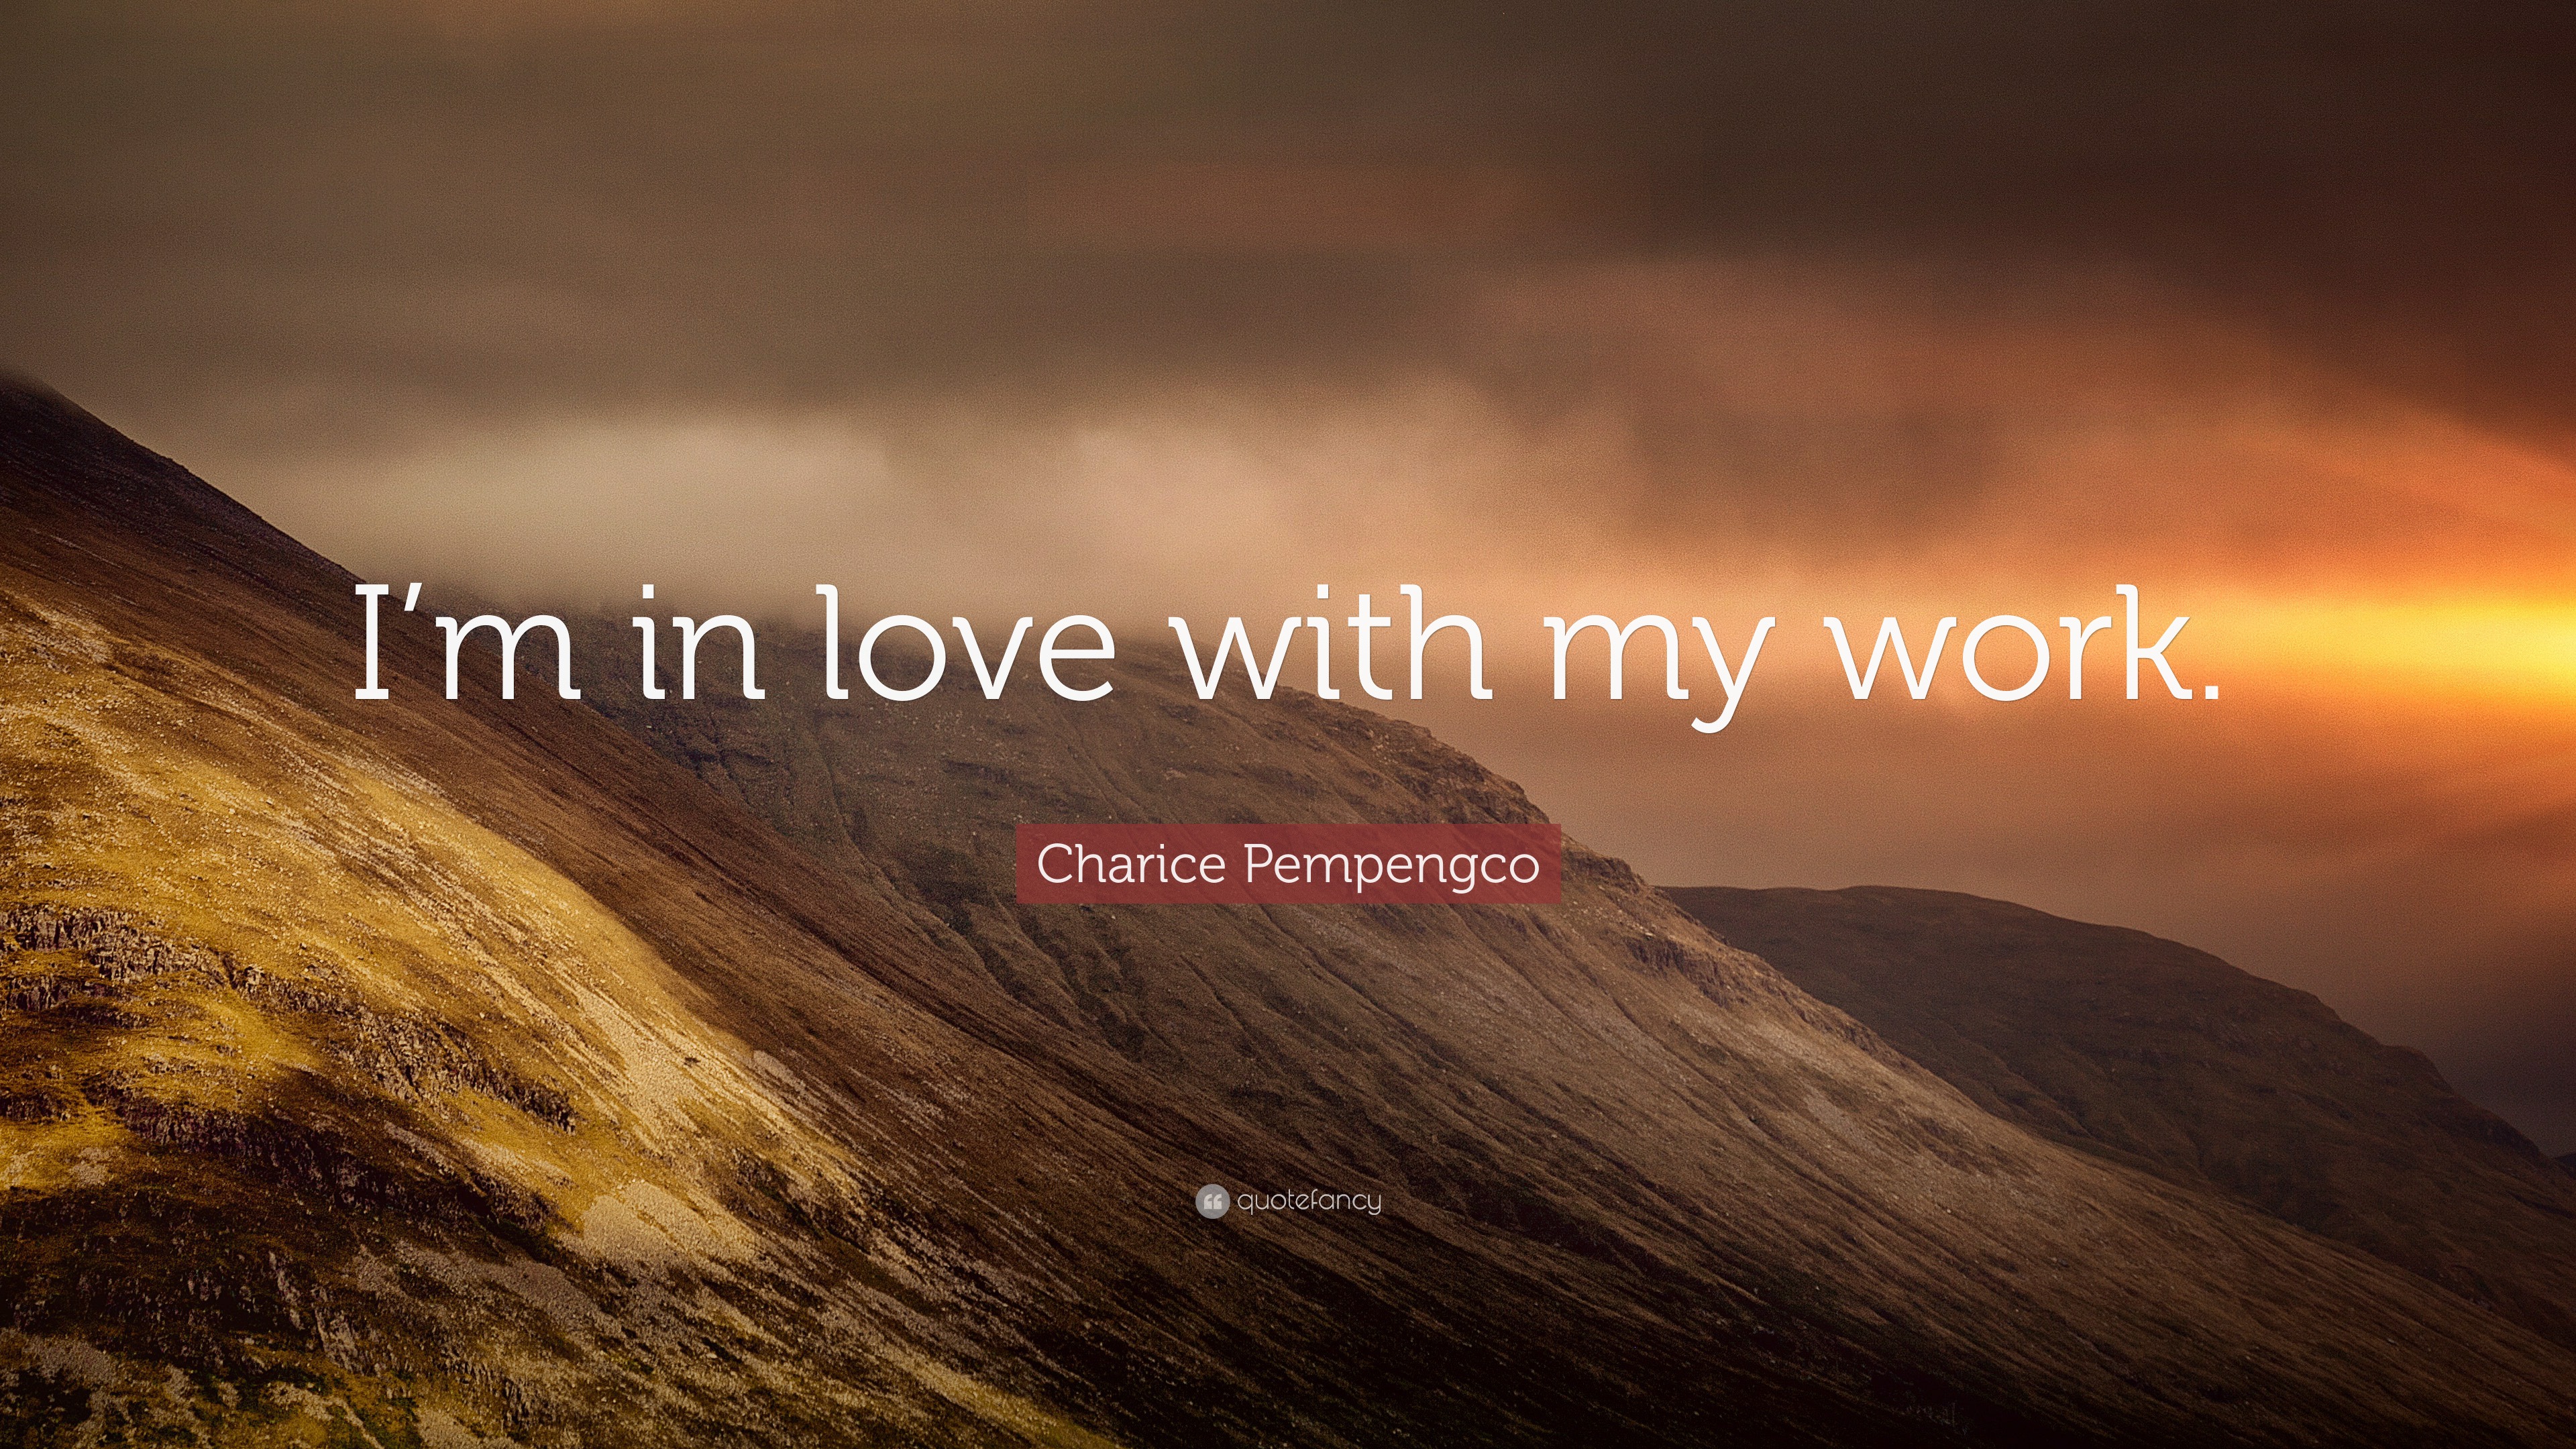 Charice Pempengco Quote: “I'm in love with my work.”